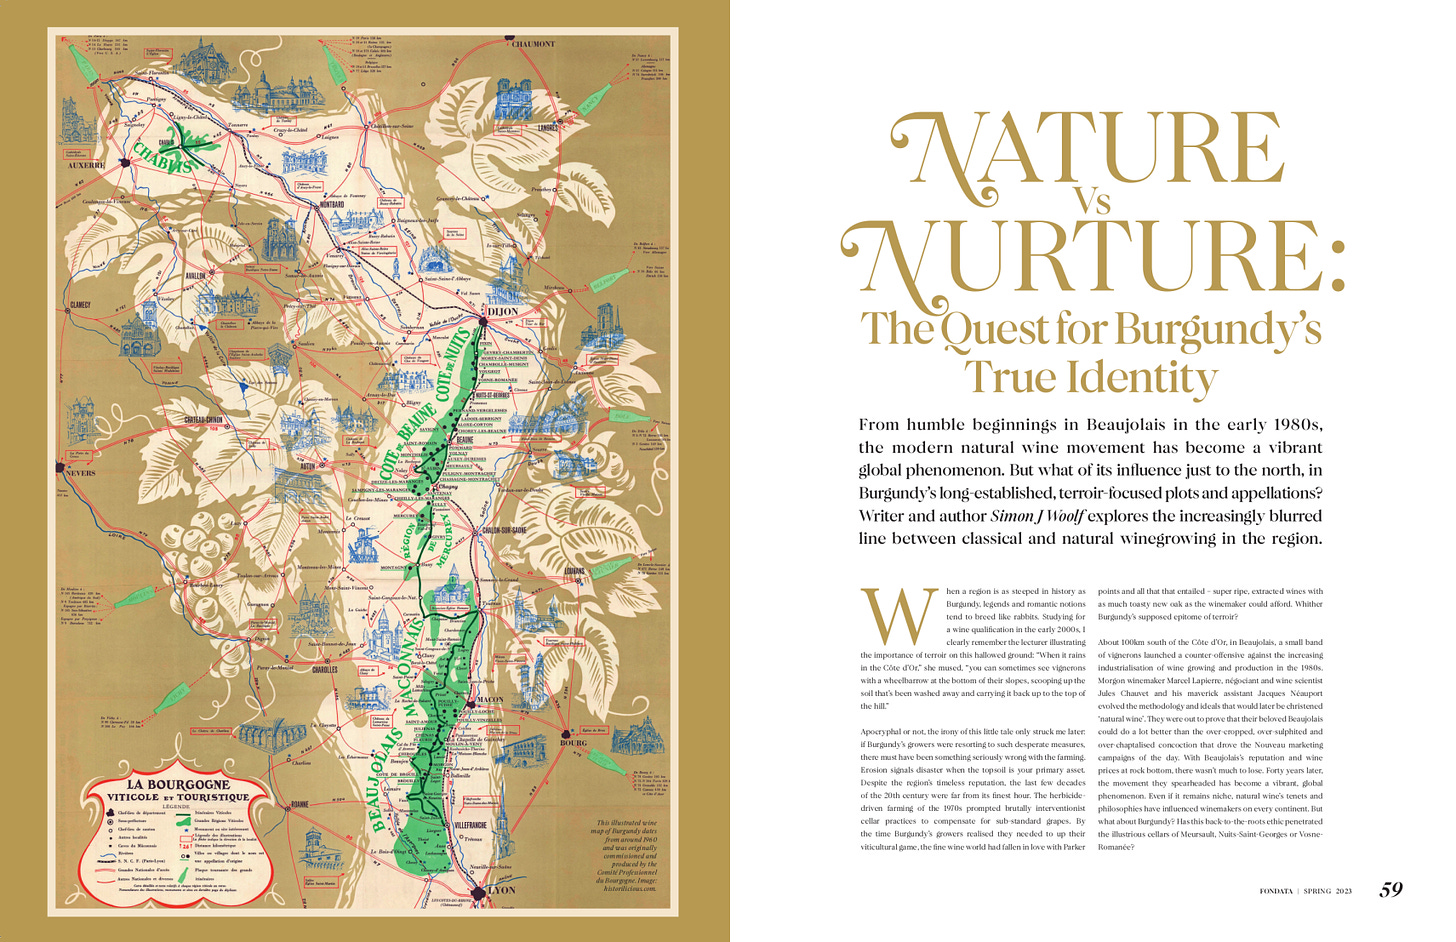 Nature versus Nurture - The quest for true identity in Burgundy. Double page spread from the original article in Fondata magazine.